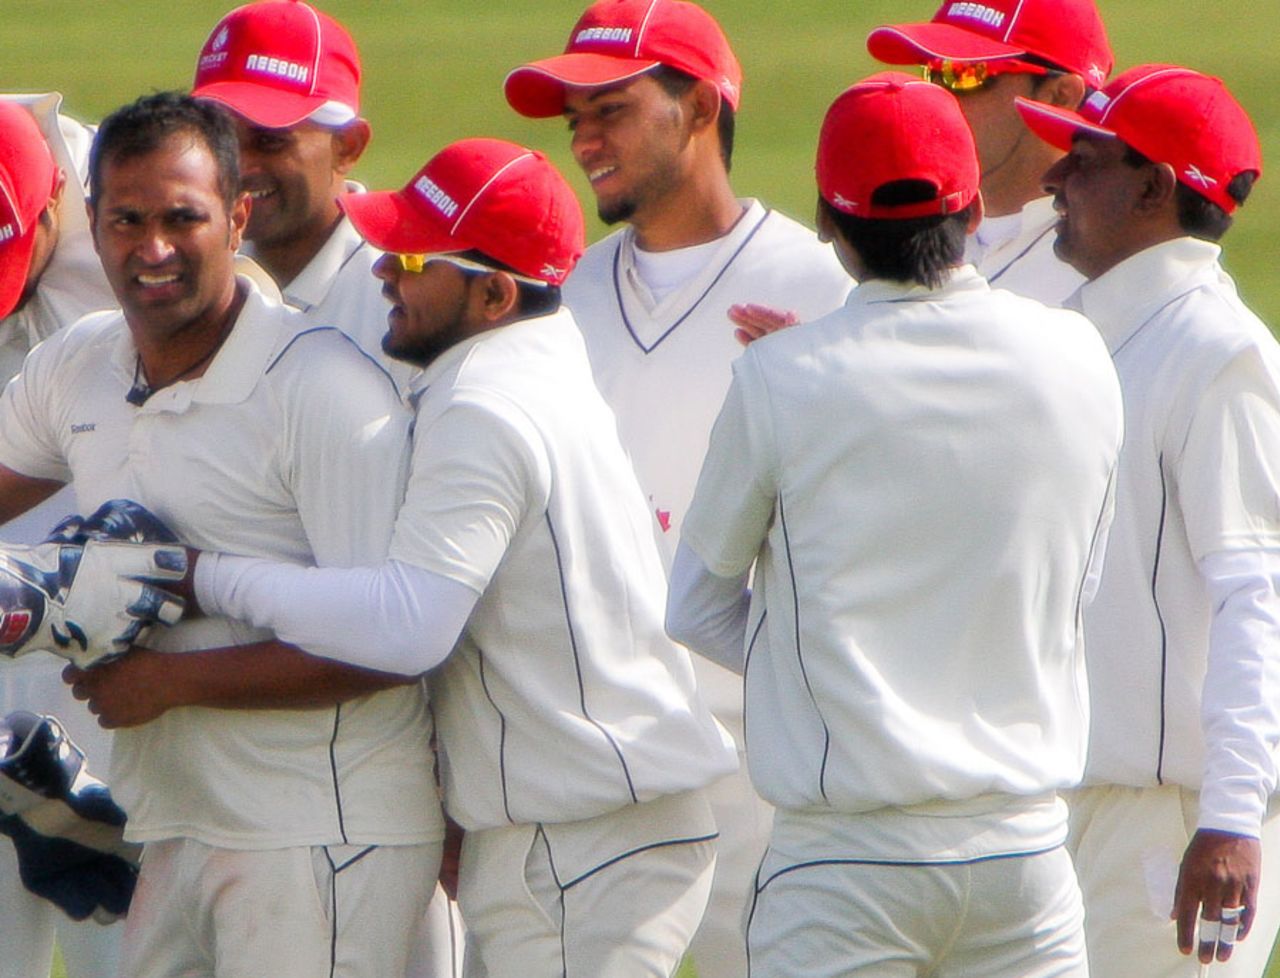 Khurram Chohan is congratulated by his team-mates after dismissing Andrew White, Ireland v Canada, Intercontinental Cup, 1st day, Dublin, September 13, 2011